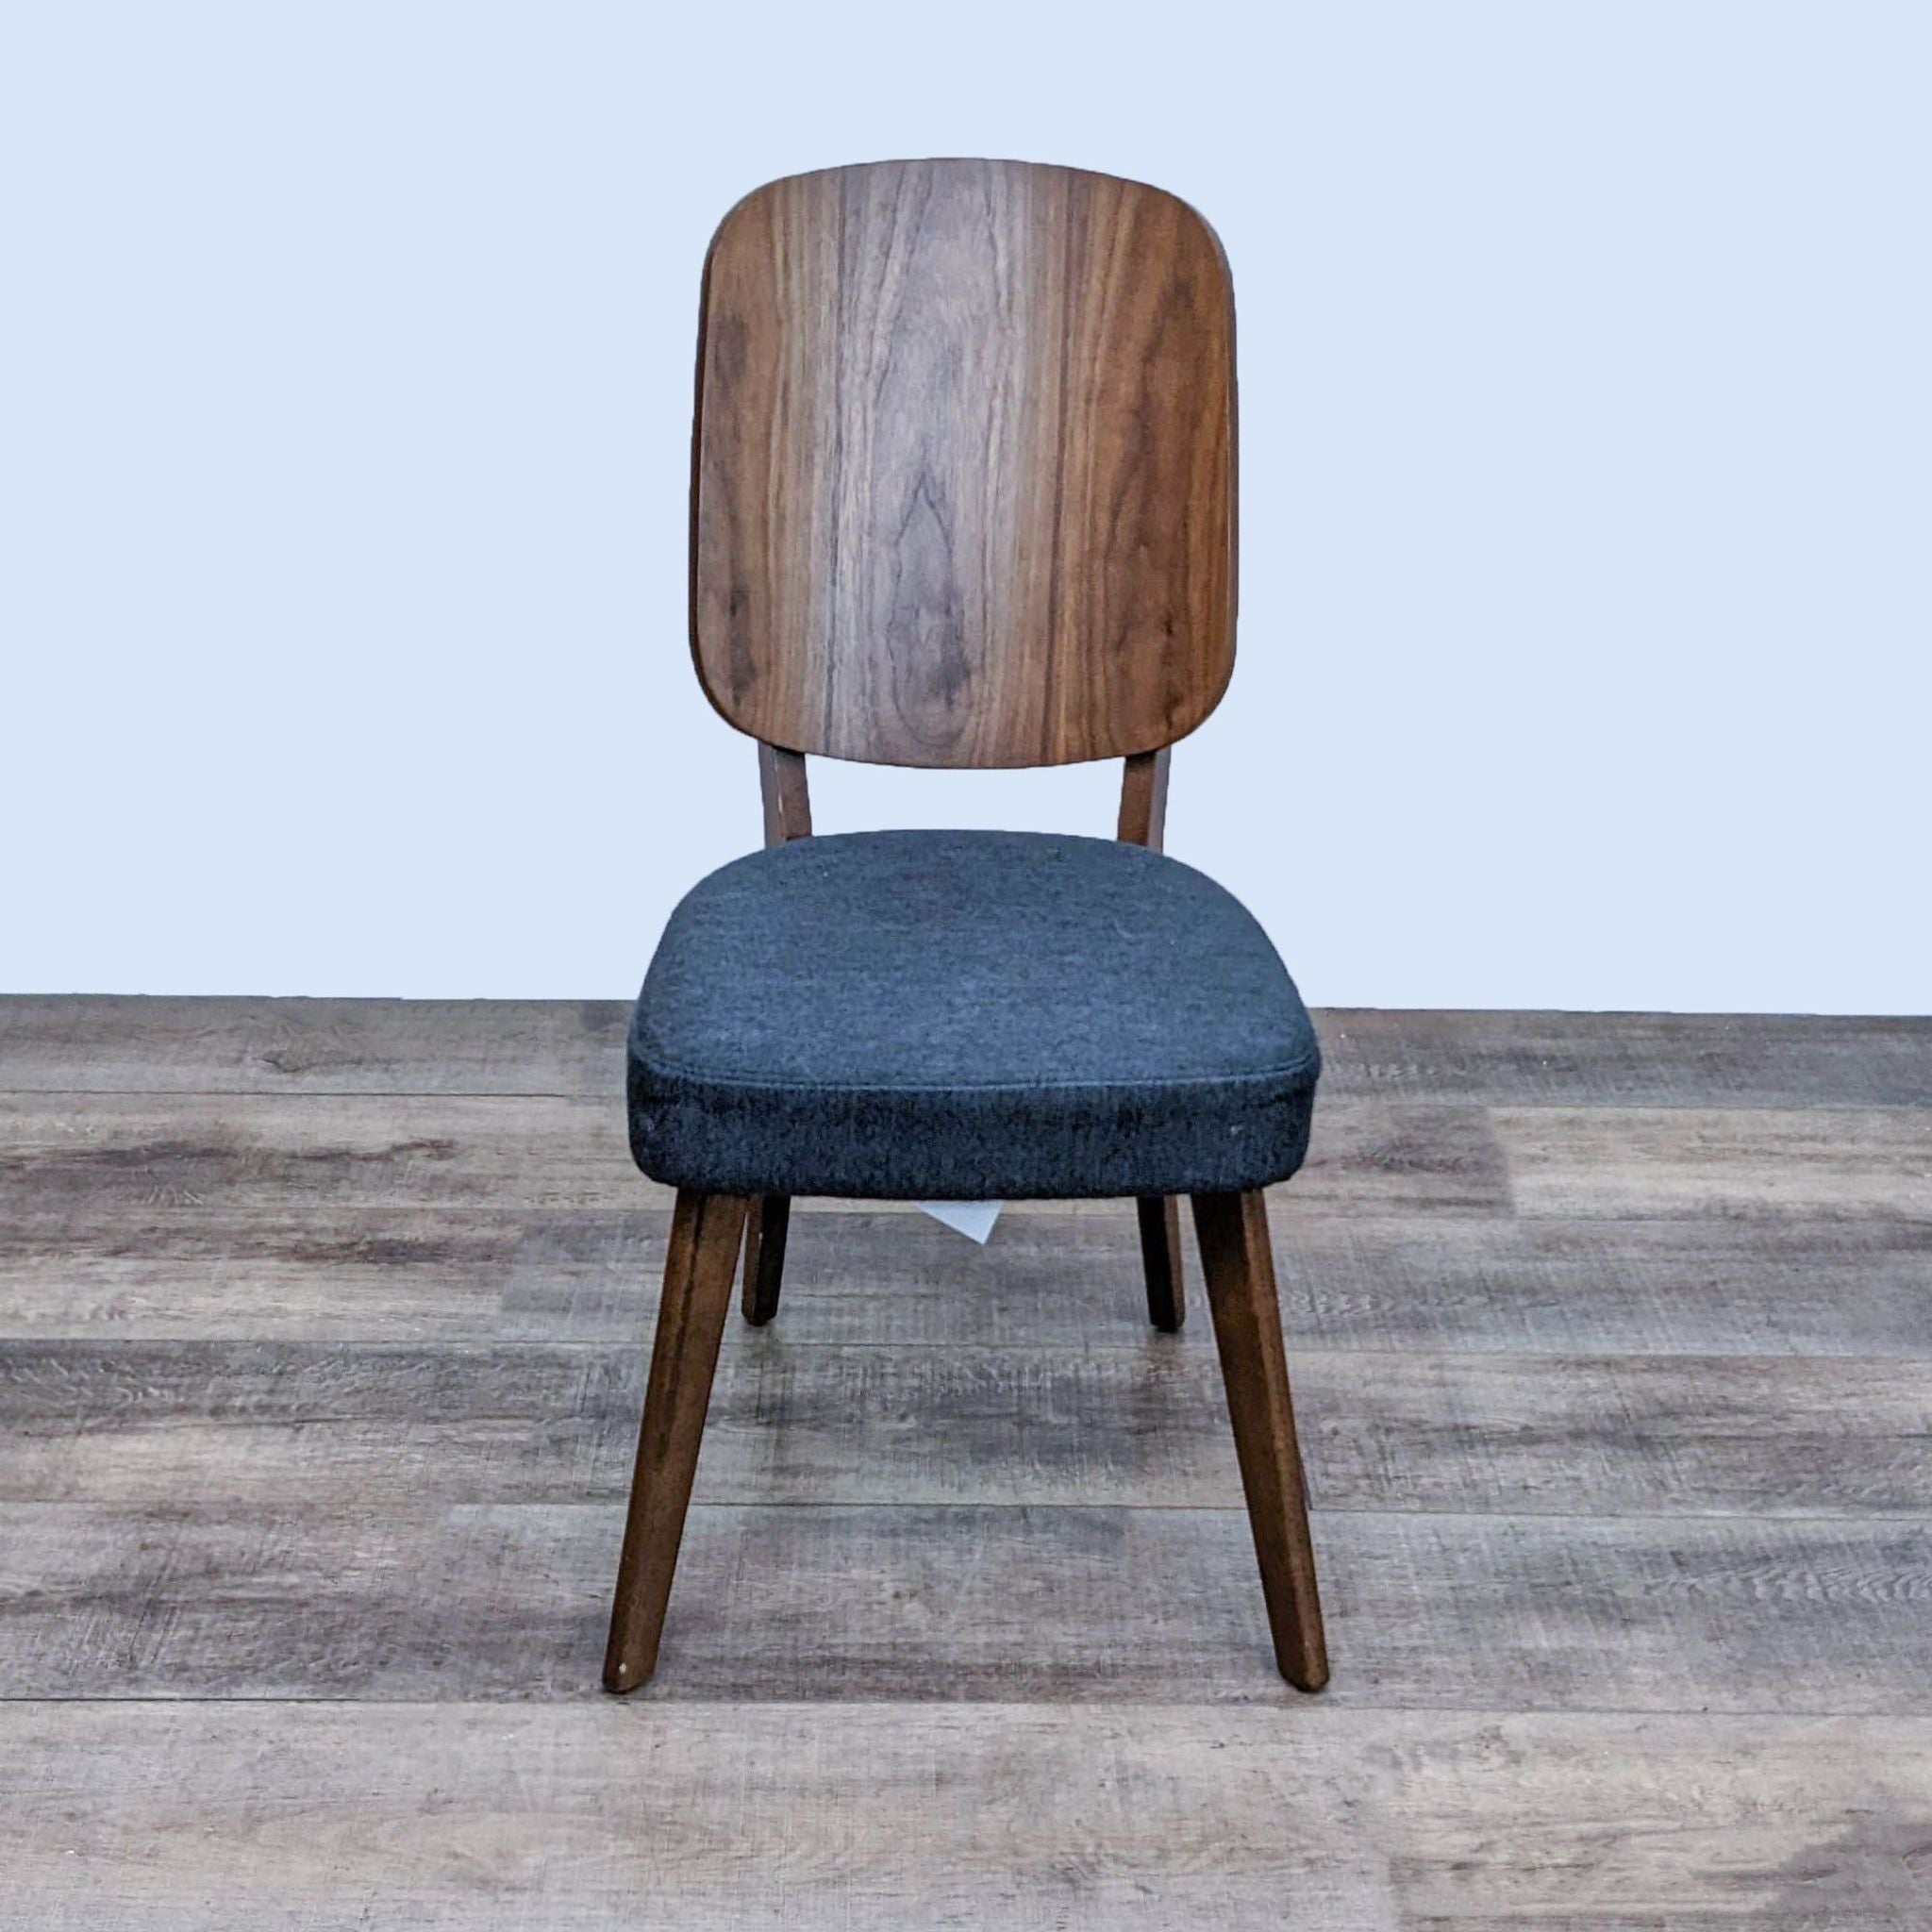 Zuo Modern Alberta dining chair with curved wooden back and gray cushion, retro-modern style, on wood floor.